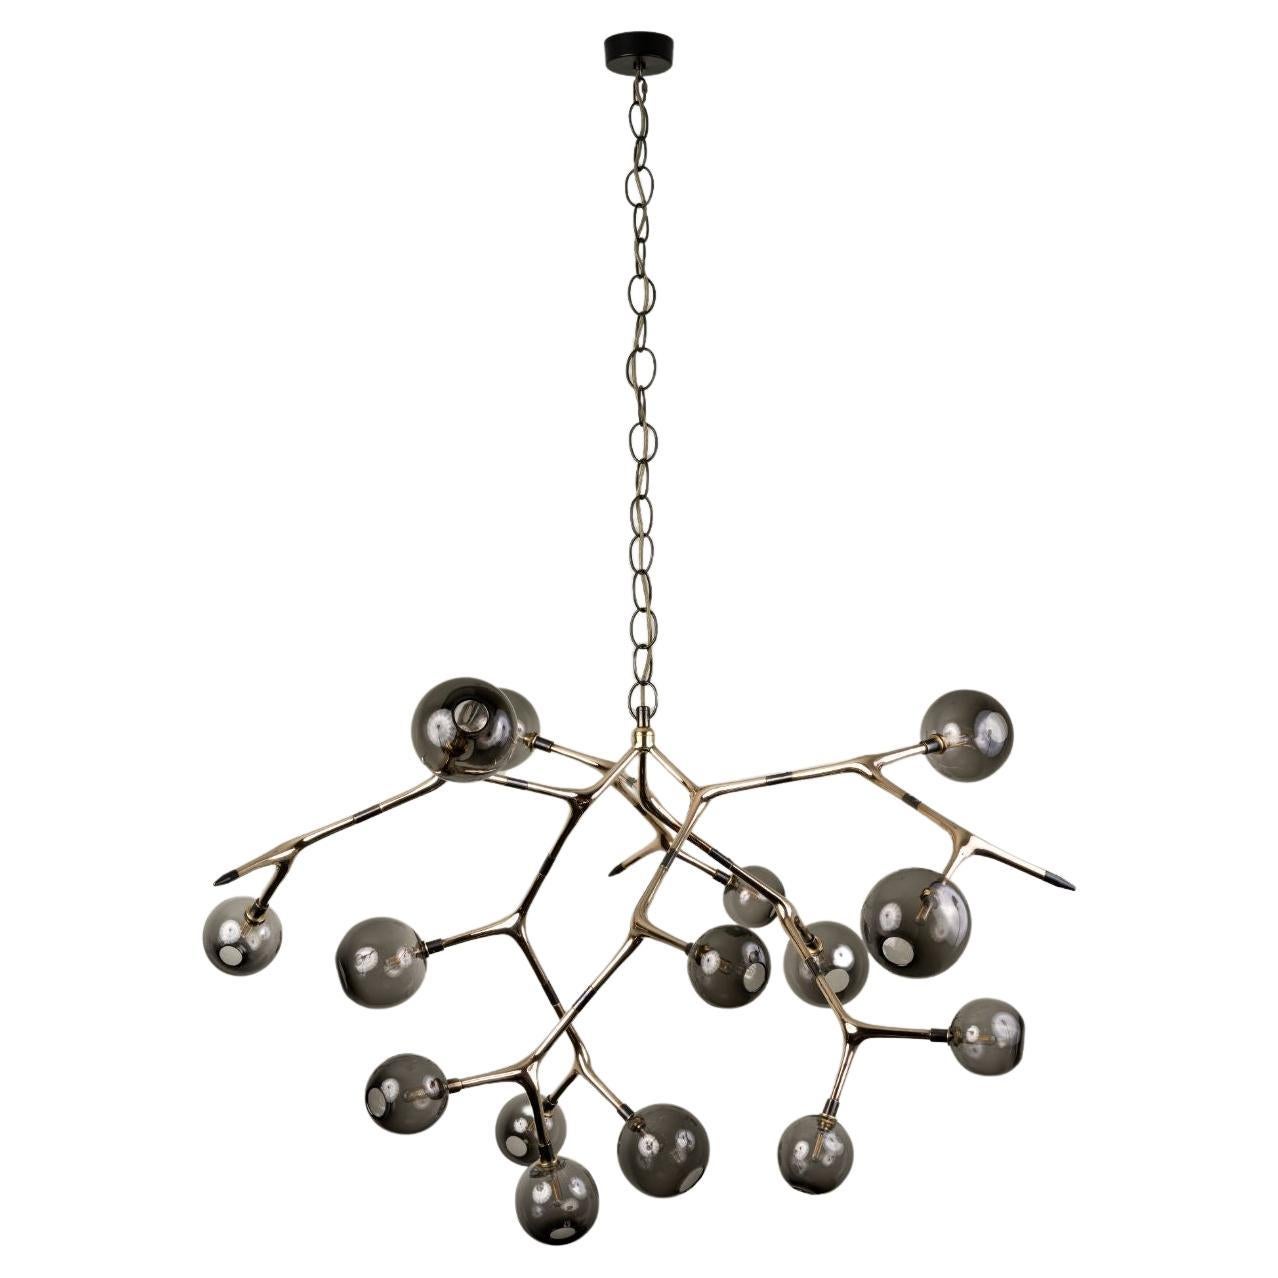 Smoke and Polished Bronze Maratus 15 Pendant Lamp by Isabel Moncada For Sale